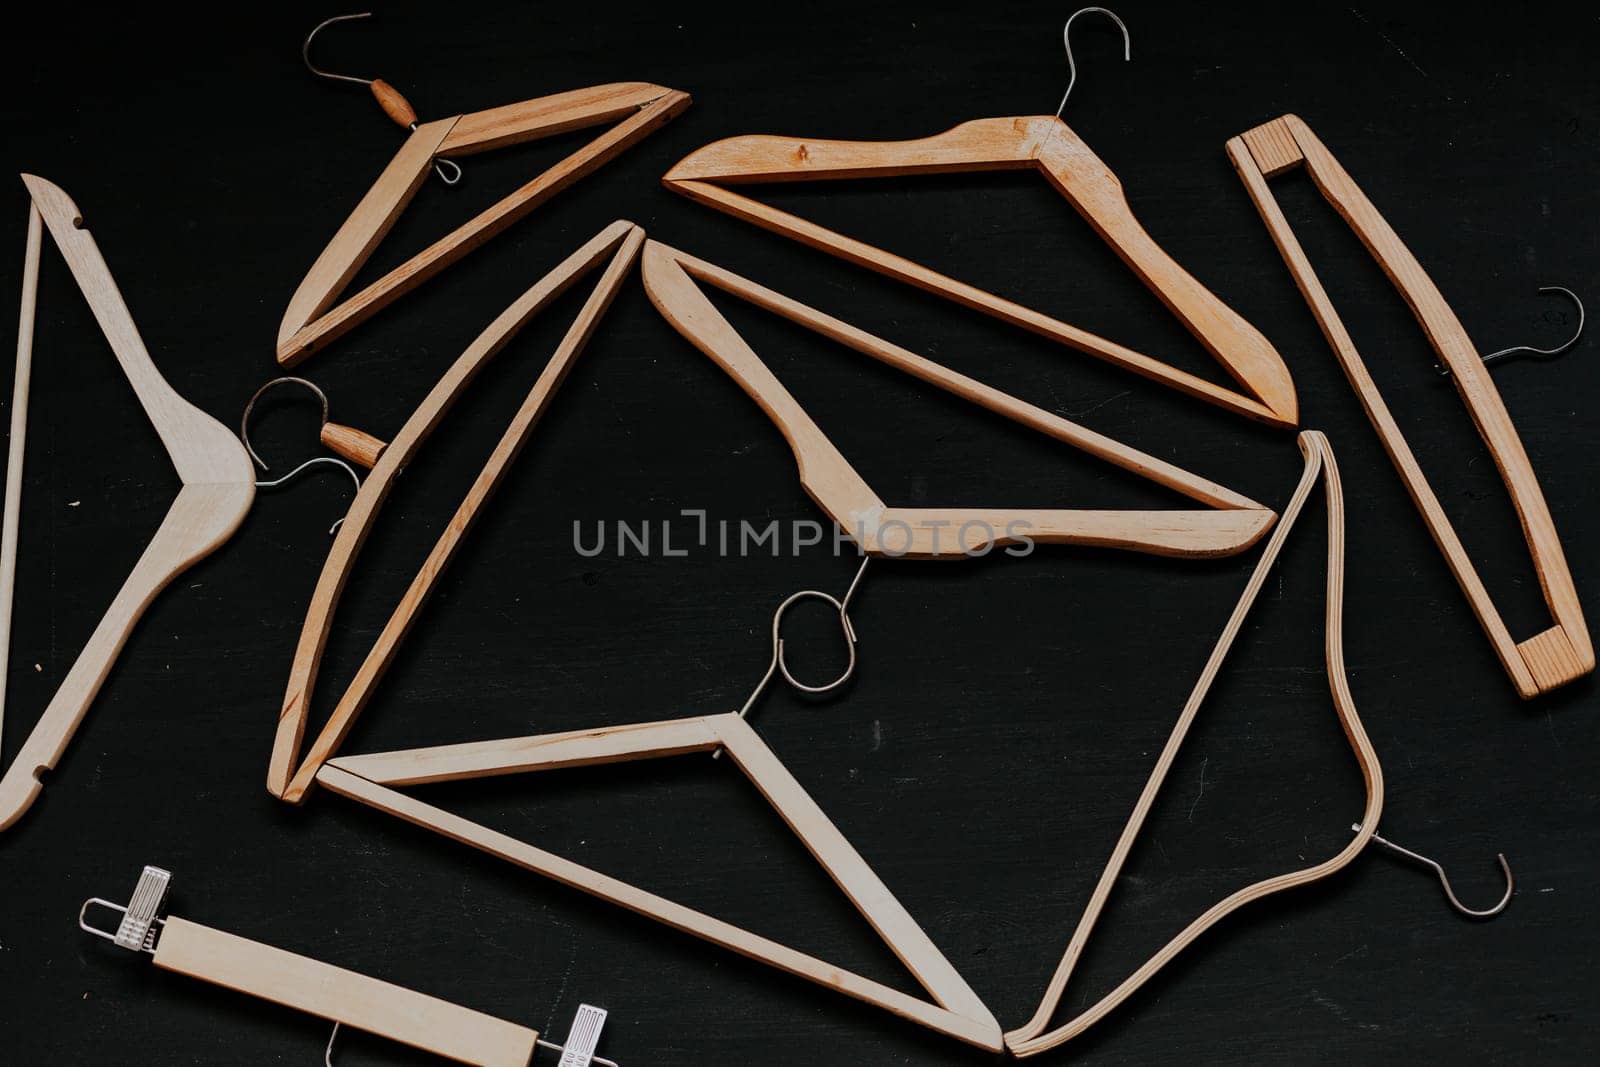 Vintage clothing hangers on a black background by Simakov